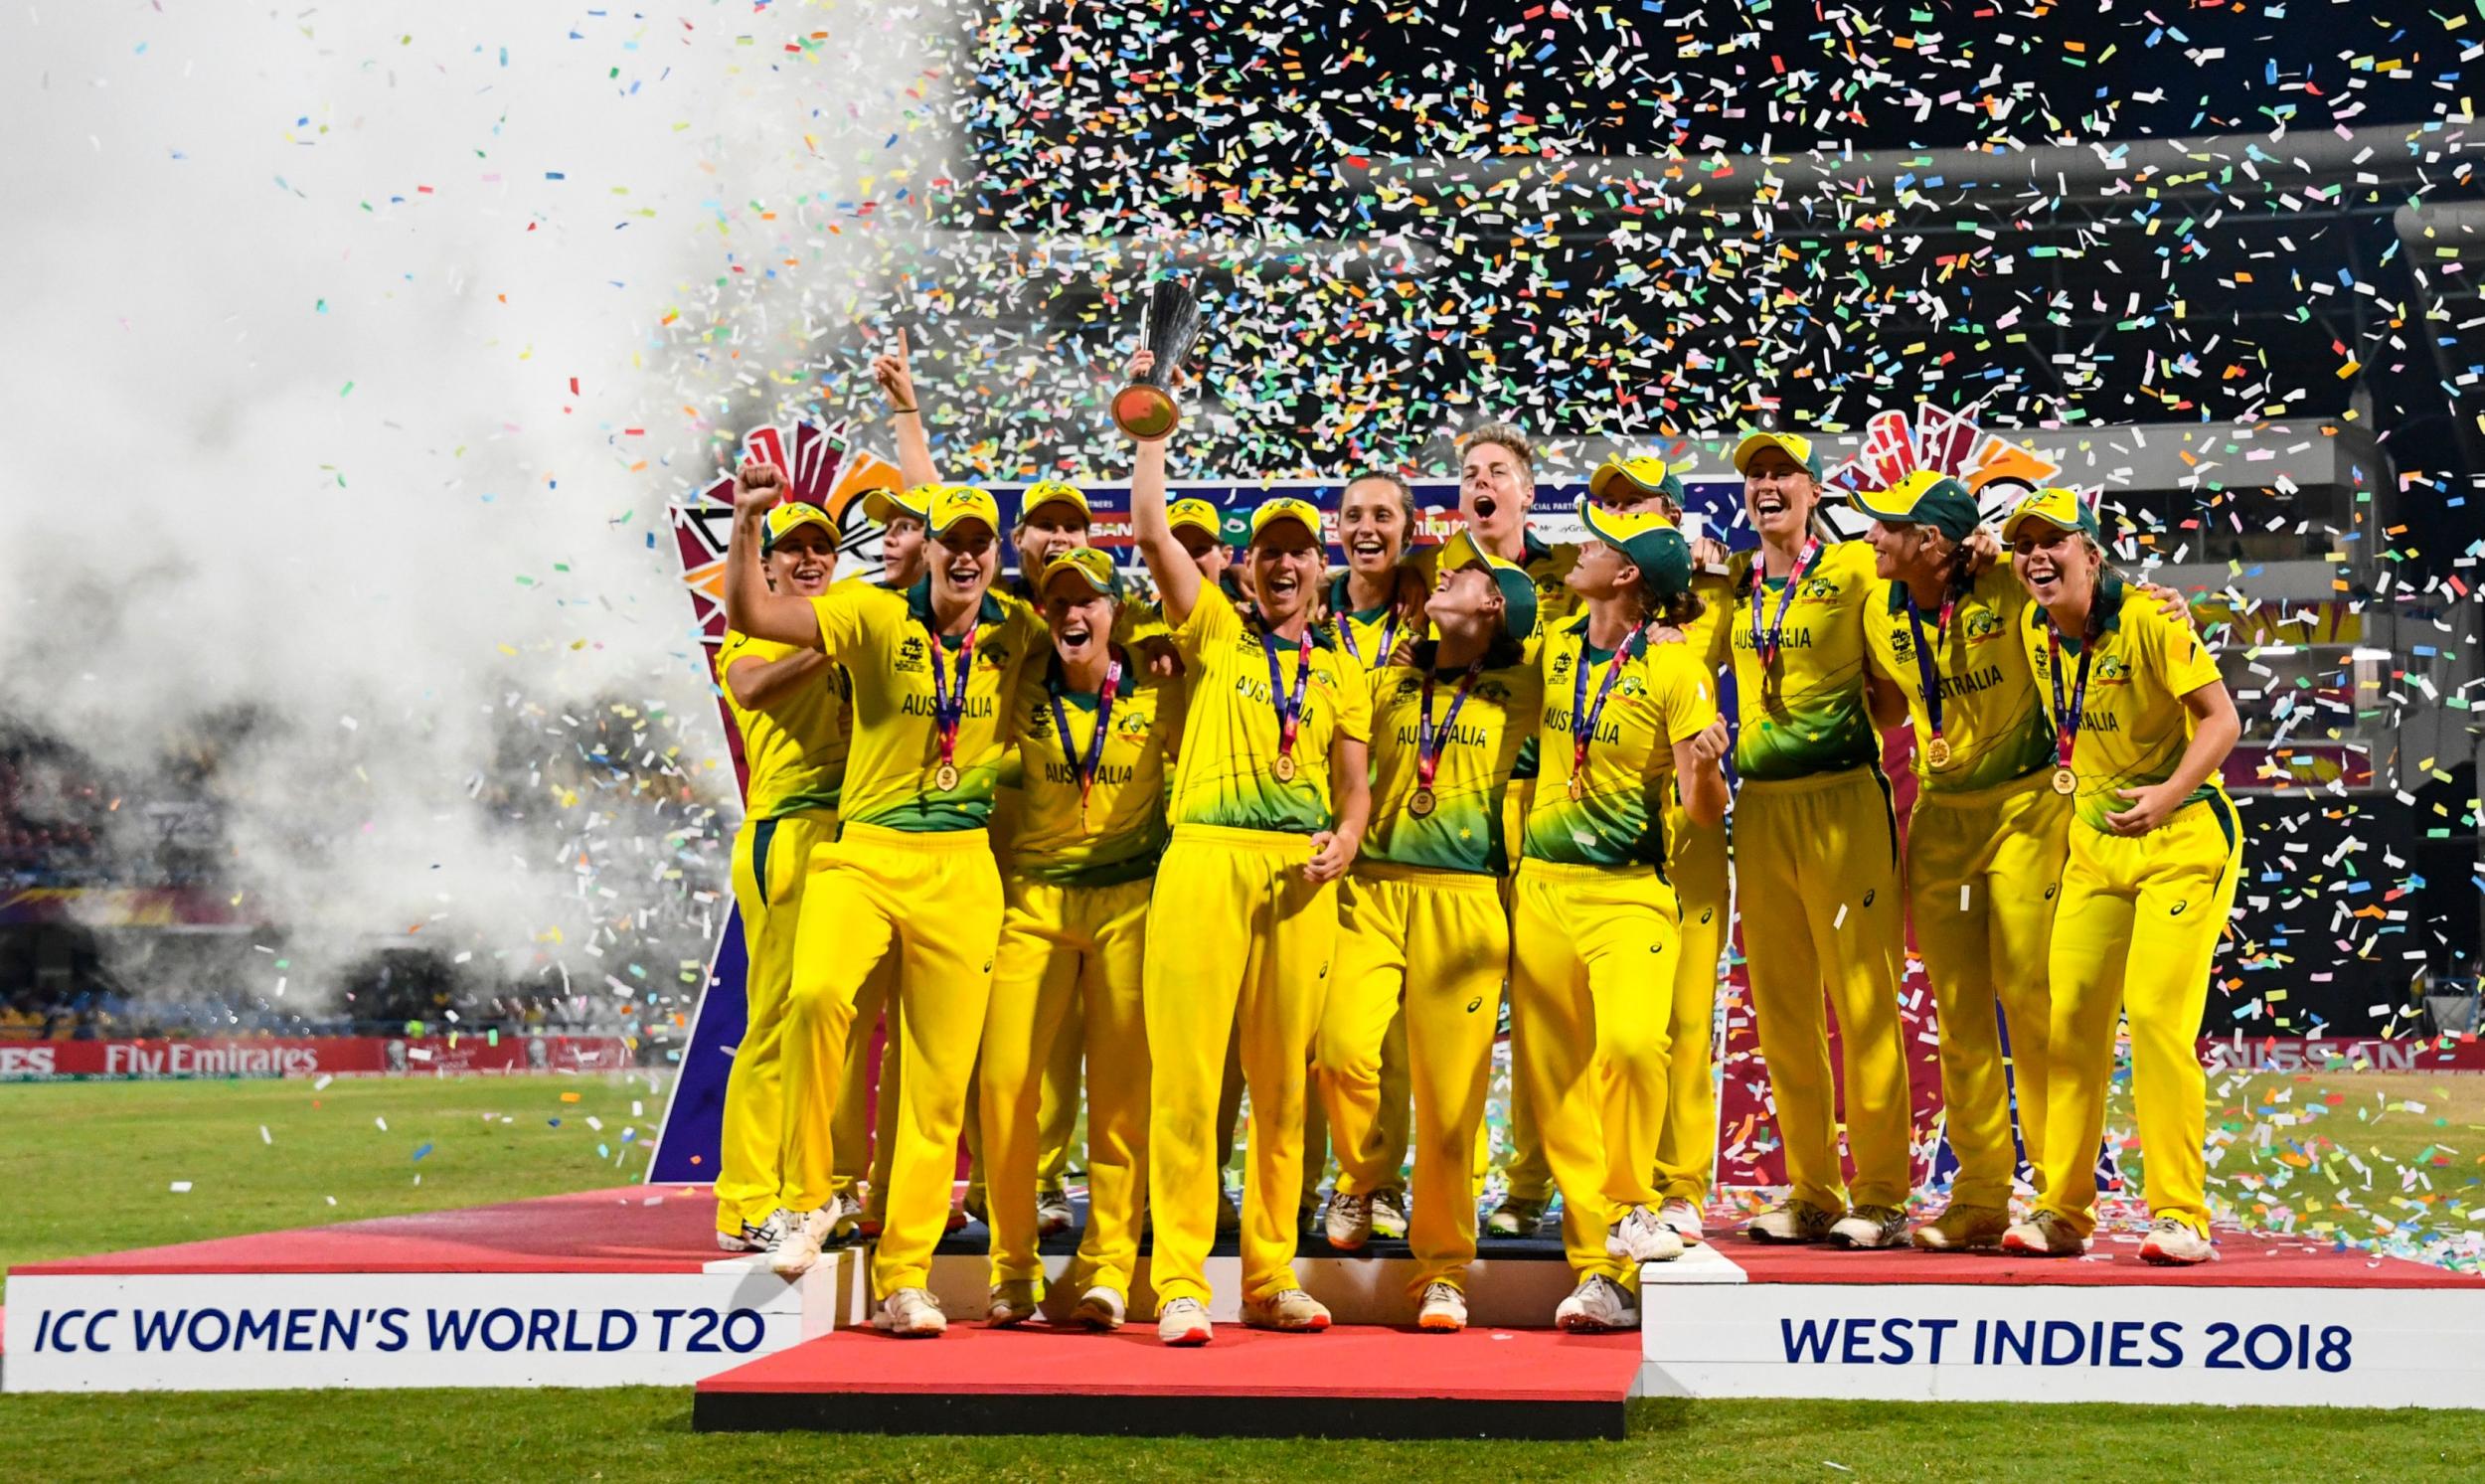 Australia beat England in the World Cup final